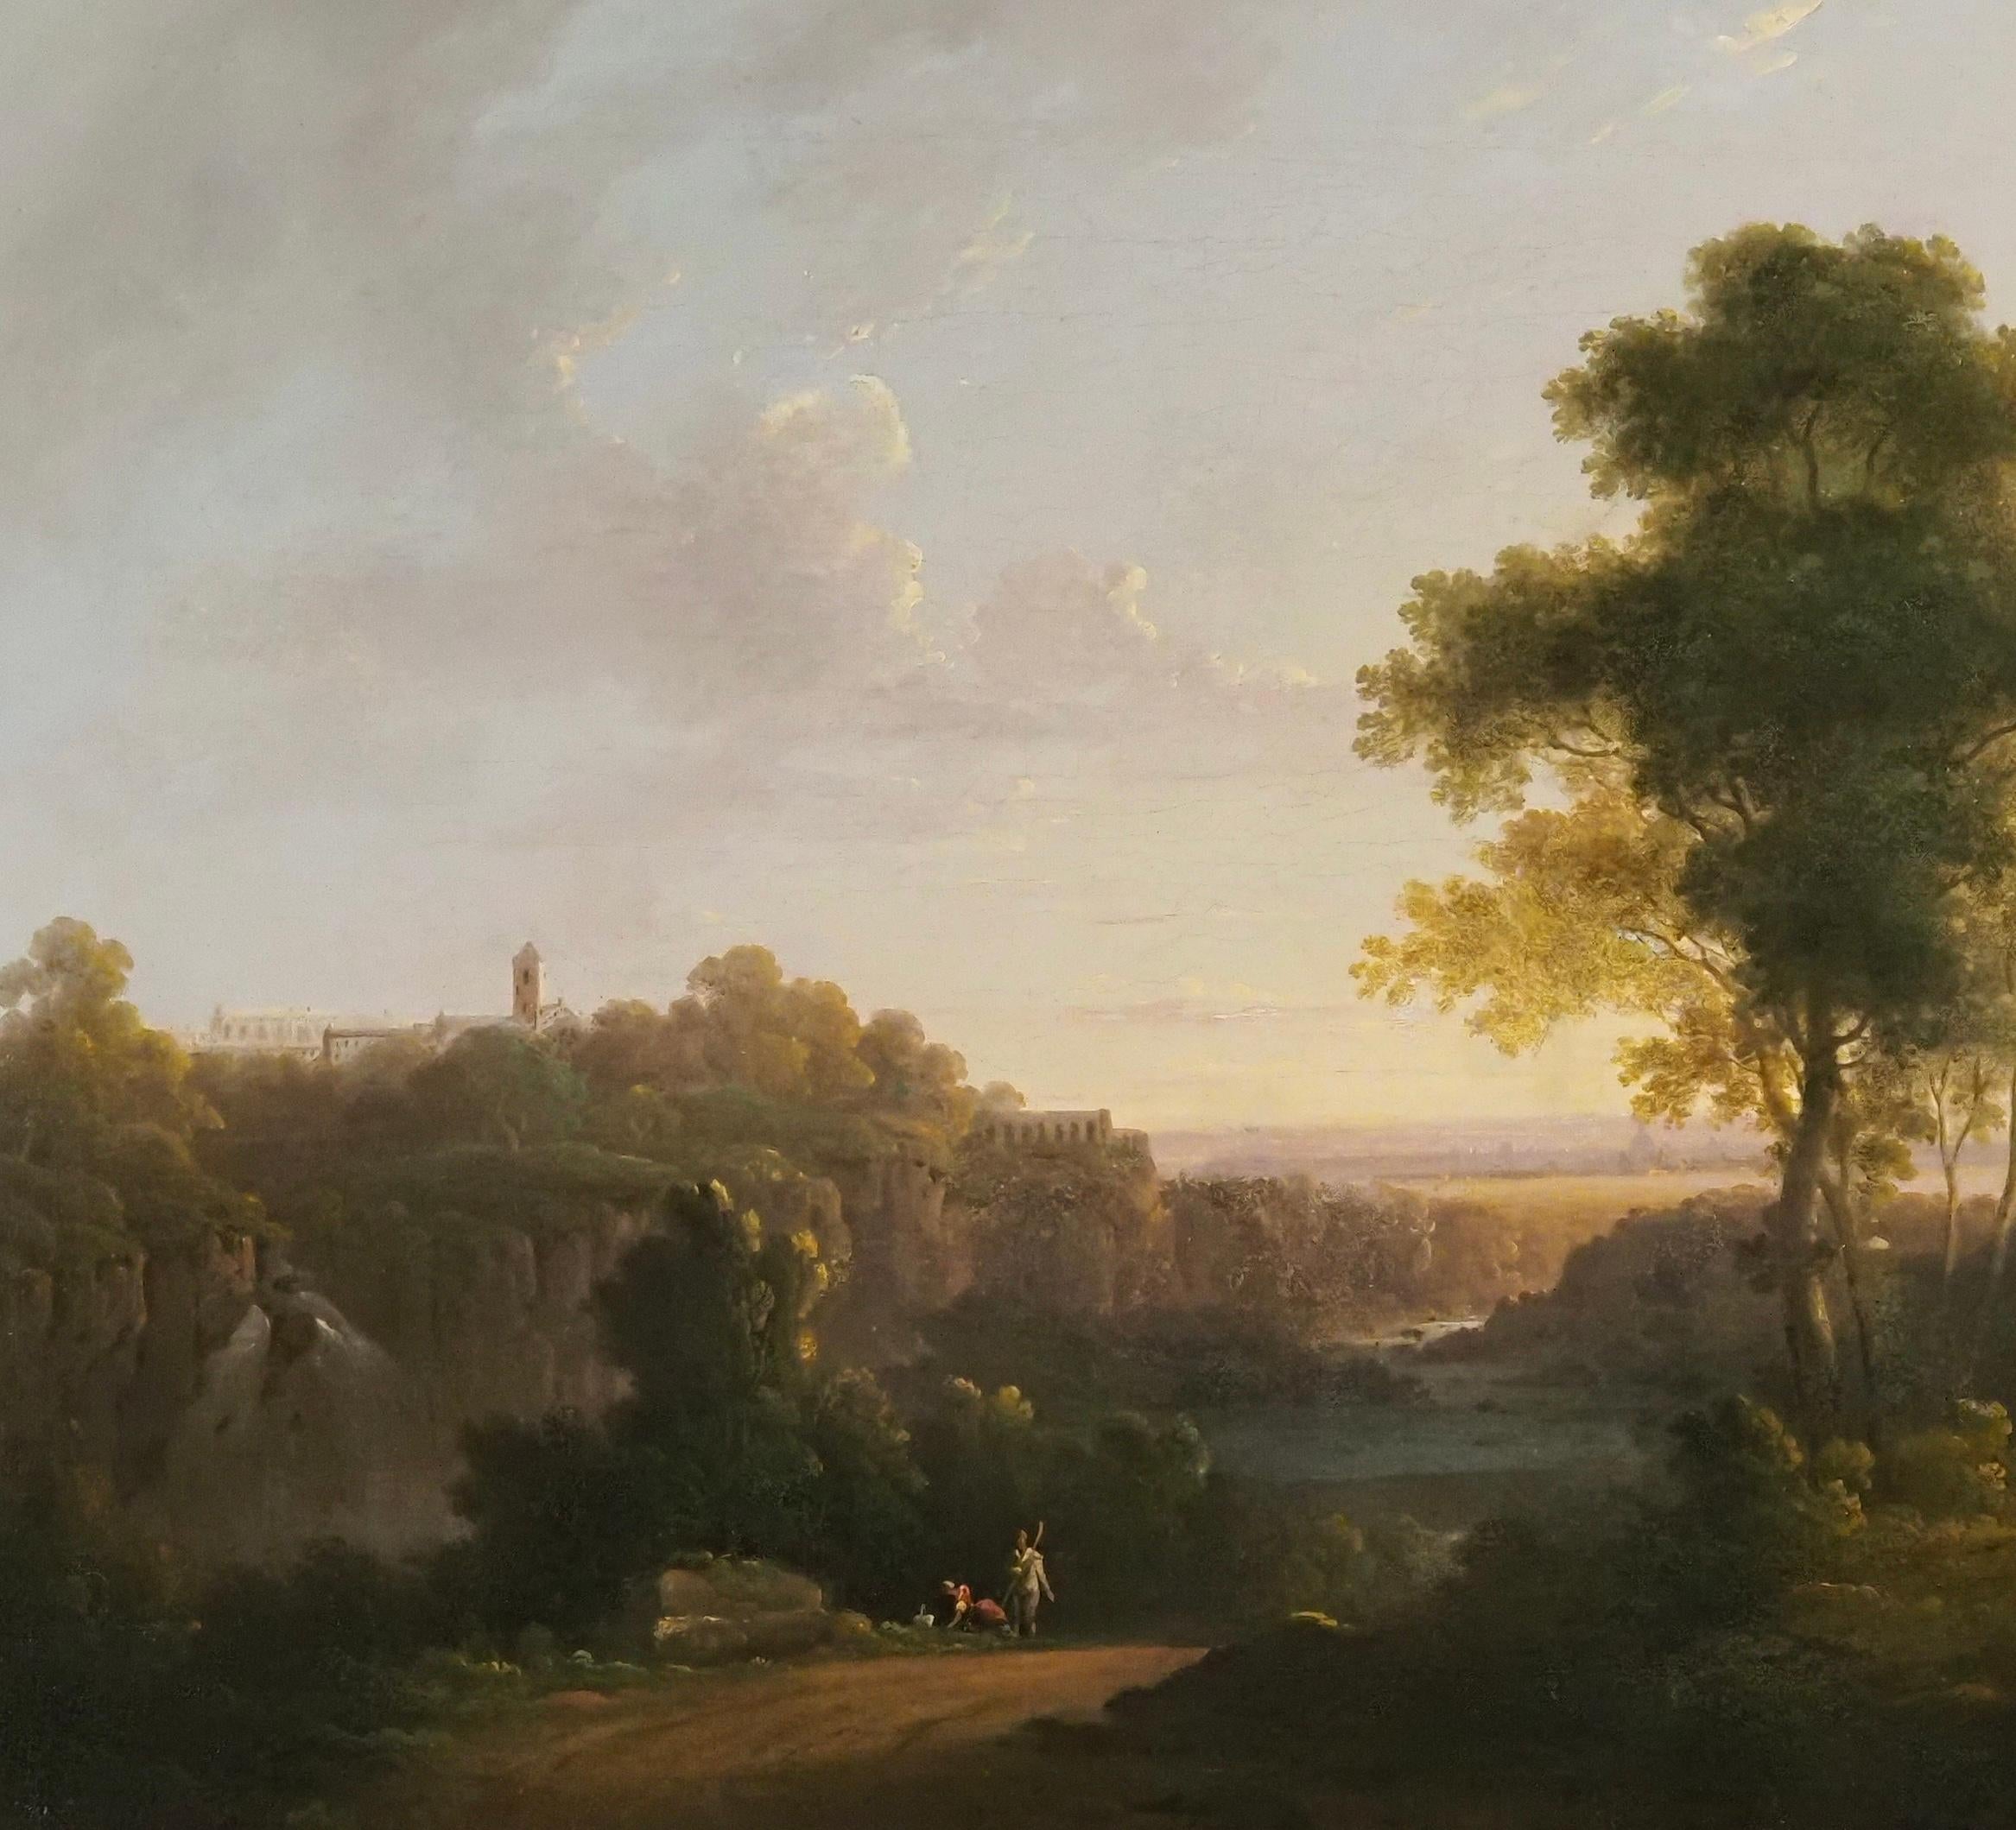 John Rathbone (1750-1807)
View at Tivoli
Signed lower right
Oil on Canvas
Canvas size - 18 x 24 in
Framed size - 24 x 30 in

John Rathbone was born in Cheshire in 1750 and worked as an artist in Manchester, London, and Preston painting landscapes in